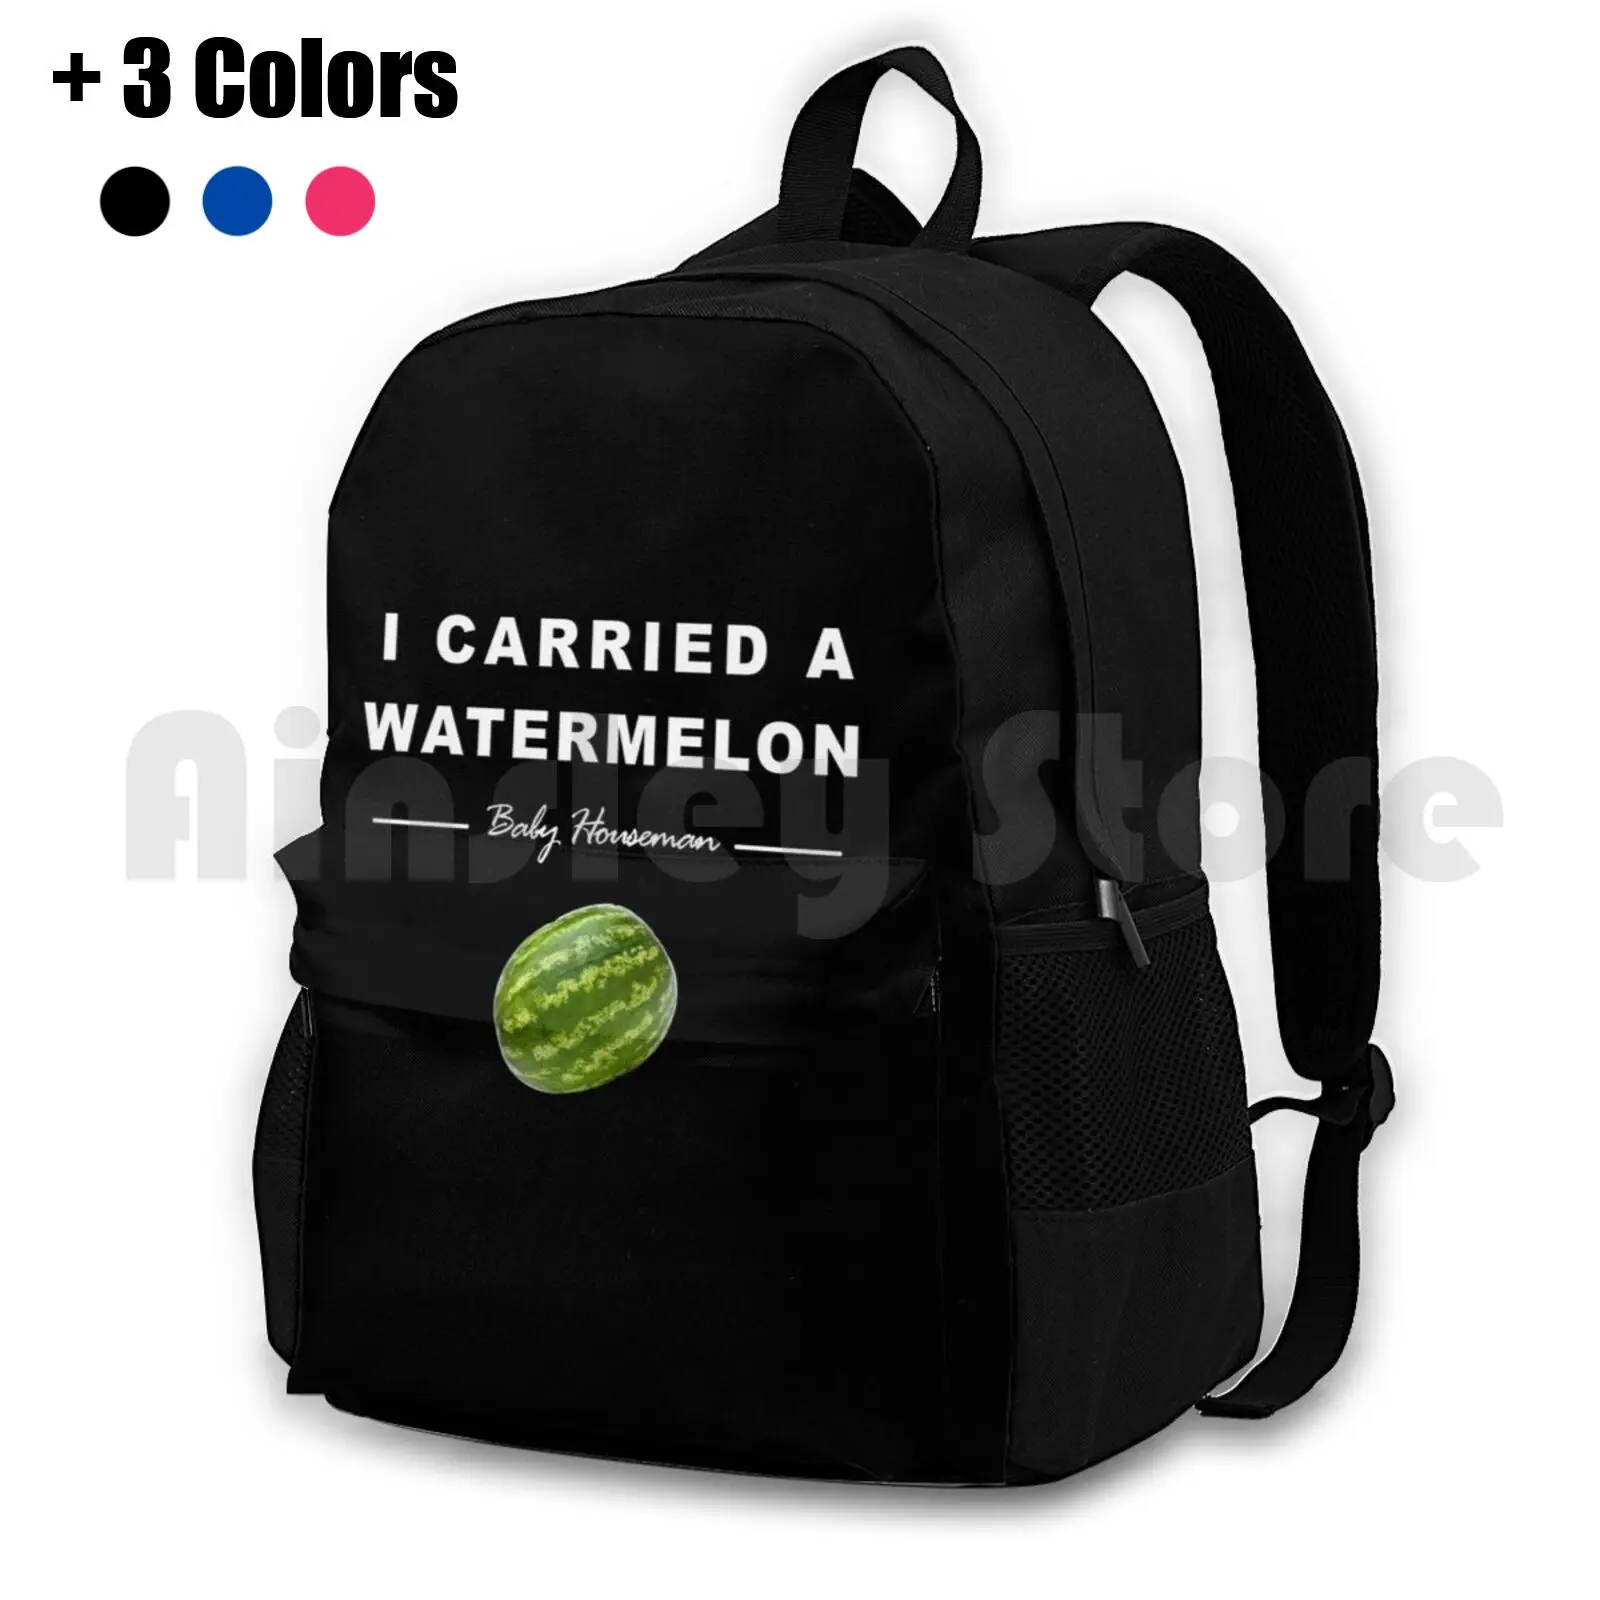 

I Carried A Watermelon Outdoor Hiking Backpack Riding Climbing Sports Bag Dirty Dancing Baby Movie Movie Quote Film Quote 80S